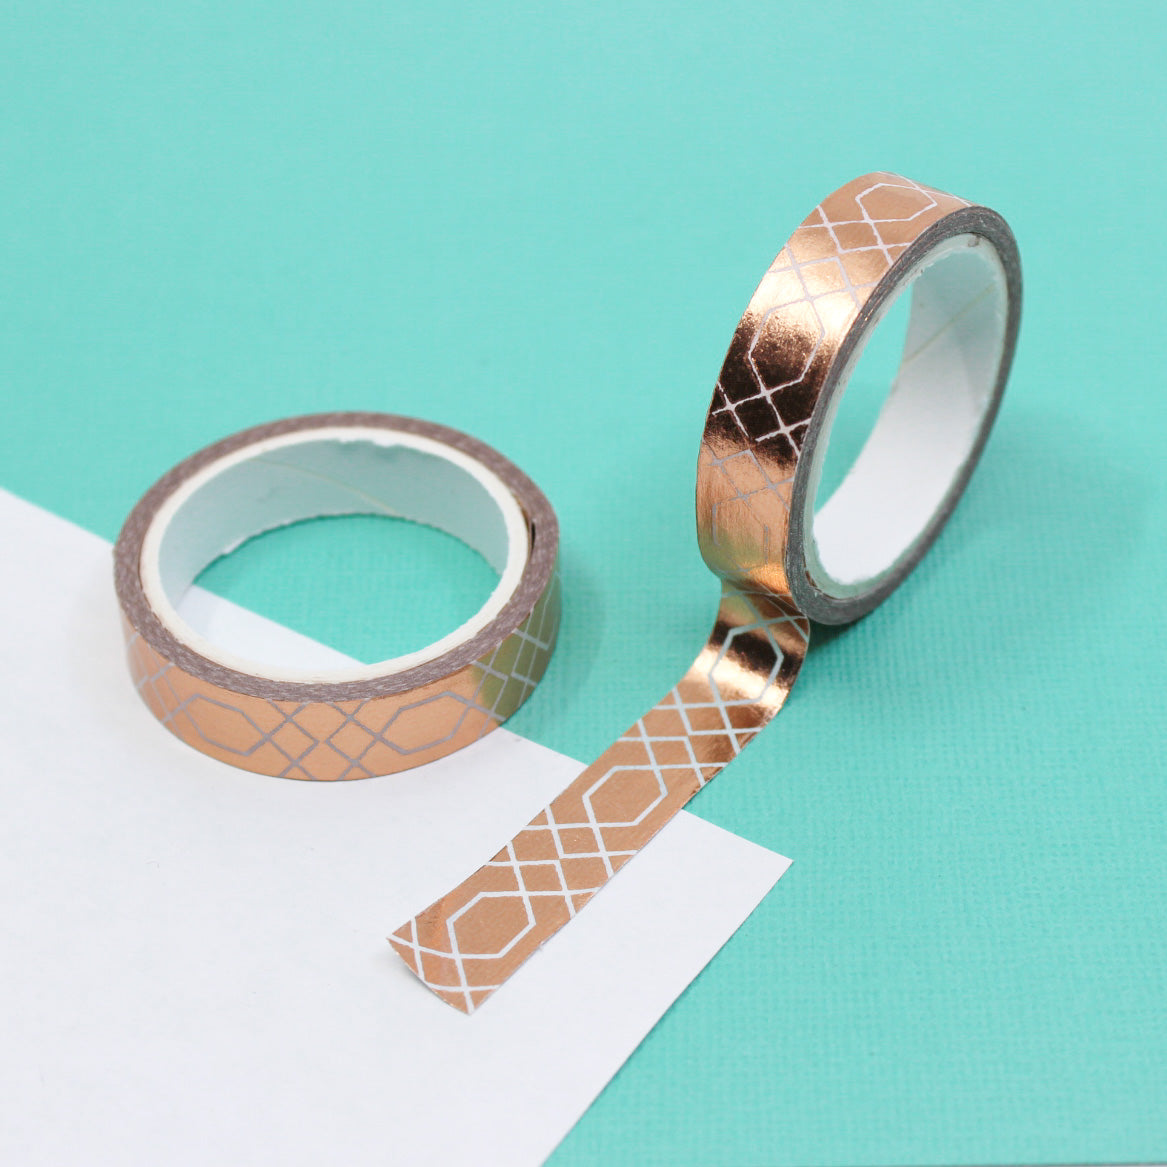 Elevate your crafts with this elegant copper foil washi tape featuring a decorative border scroll design. Perfect for adding a touch of sophistication to your scrapbooking, journaling, or card making projects. This tape is sold at BBB Supplies Craft Shop.